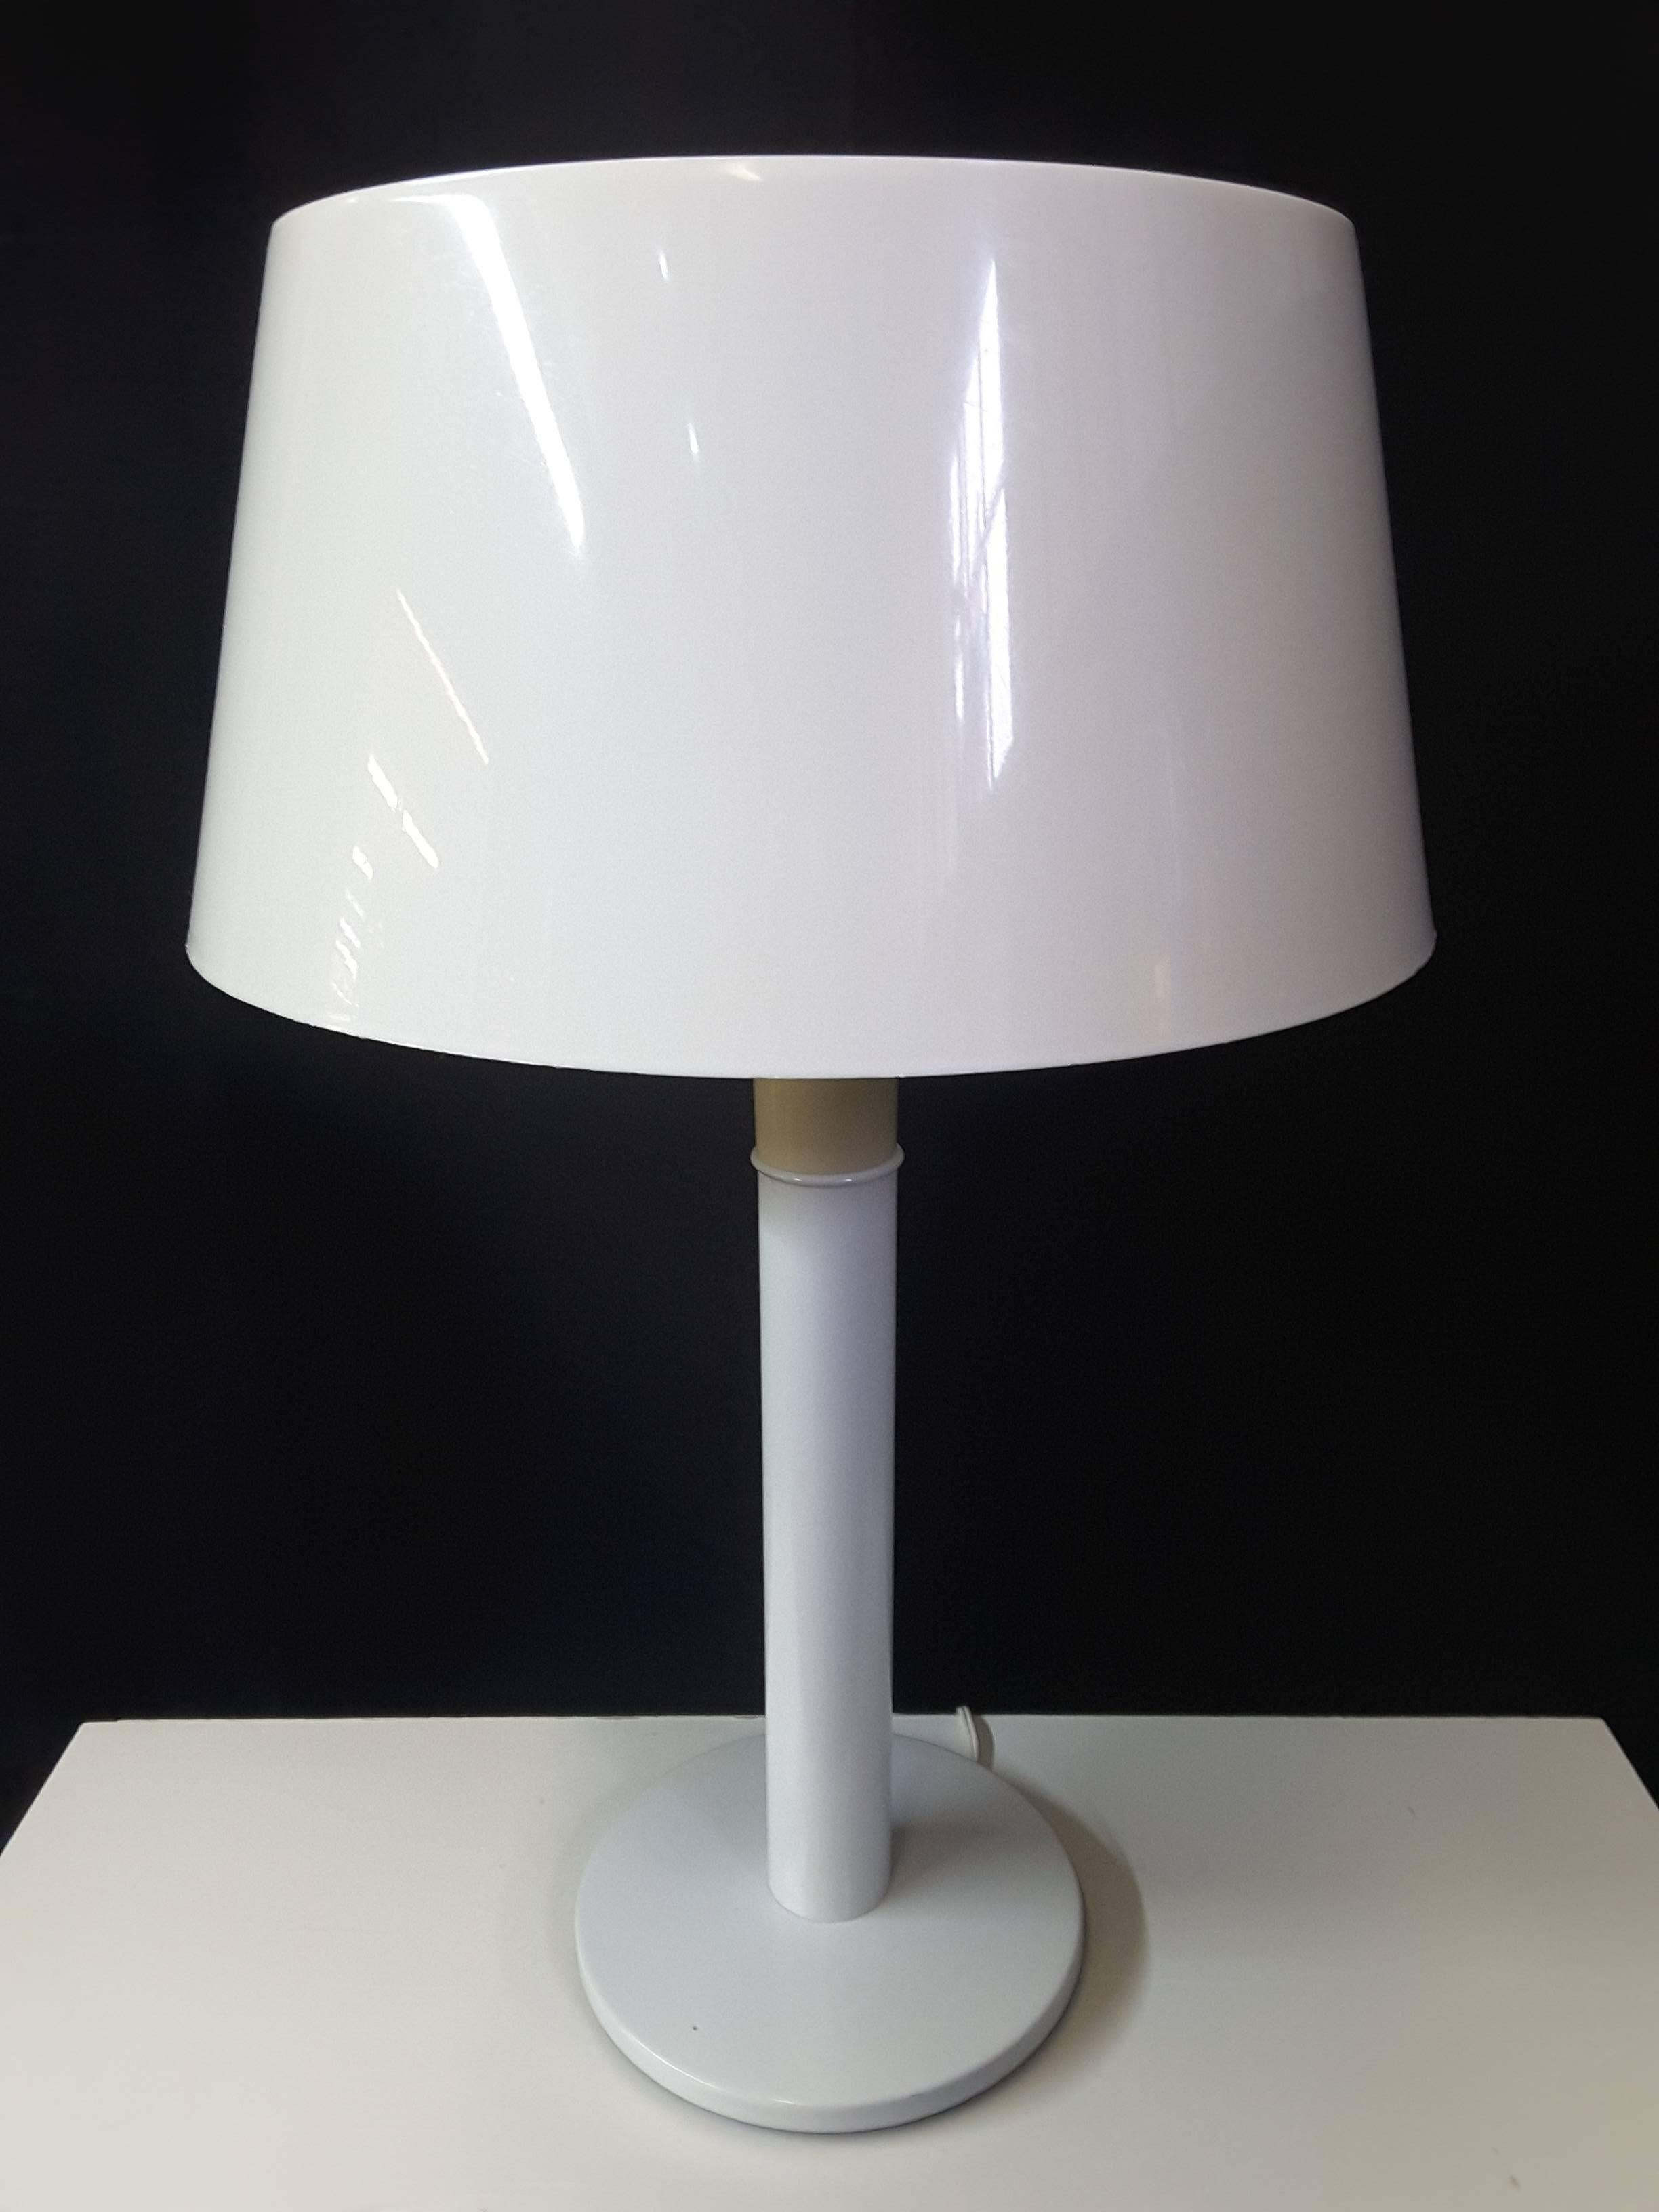 Gerald Thurston table lamp for Lightolier,  All in white, clear diffuser, which emits a nice warm color and glow. Removable shade, side switch. The lamp measures 22